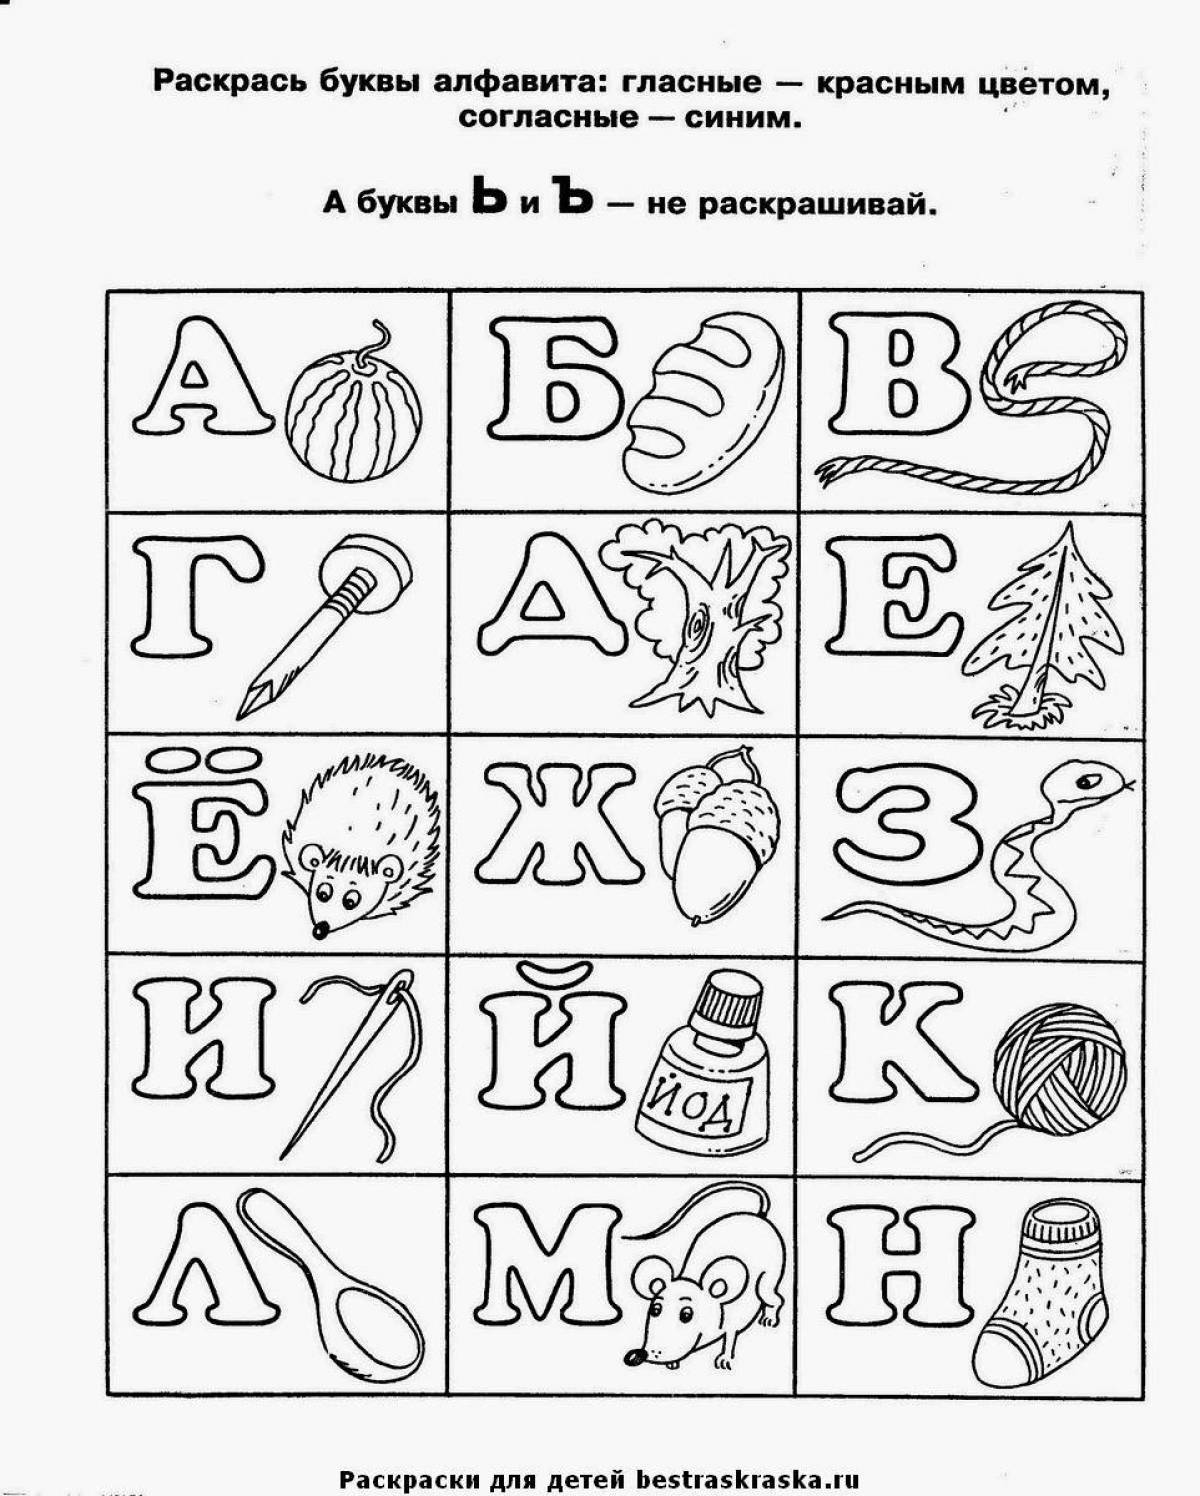 Coloring book animated Russian alphabet Laura